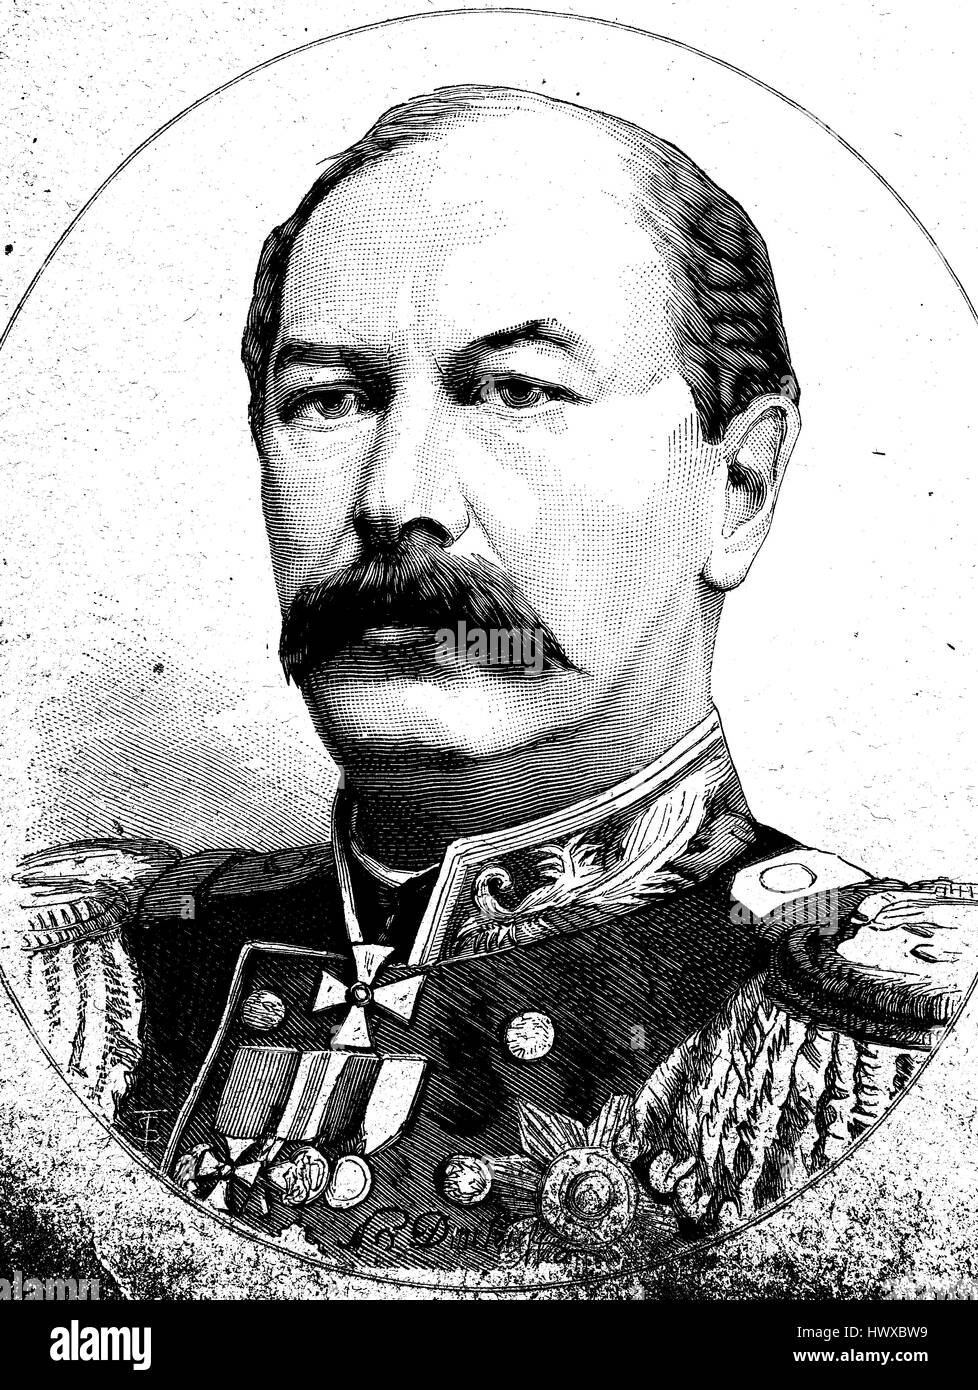 Eduard Ivanovich Totleben, sometimes transliterated as Todleben, 20 May 1818 - 1 July 1884, was a Baltic German military engineer and Imperial Russian Army general, Germany, reproduction of an image, woodcut from the year 1881, digital improved Stock Photo